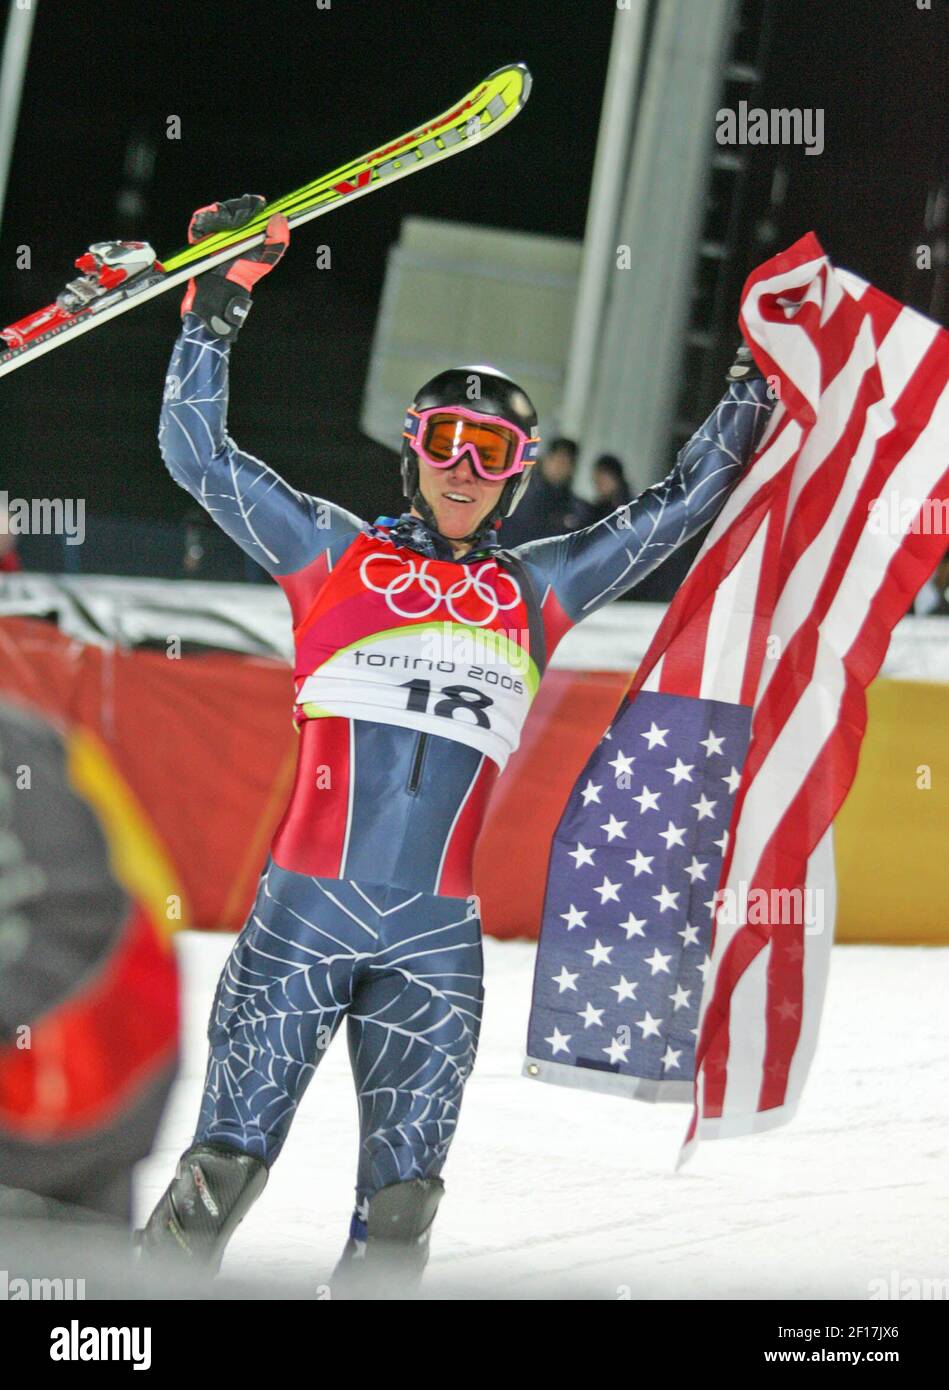 Ted Ligety of the United States celebrates his gold medal in the men's combined competition at the Turin 2006 Winter Olympic Games in Sestriere Colle, Italy Tuesday February 14, 2006. (Ron Jenkins./ Fort Worth Star-Telegram/ KRT) Stock Photo